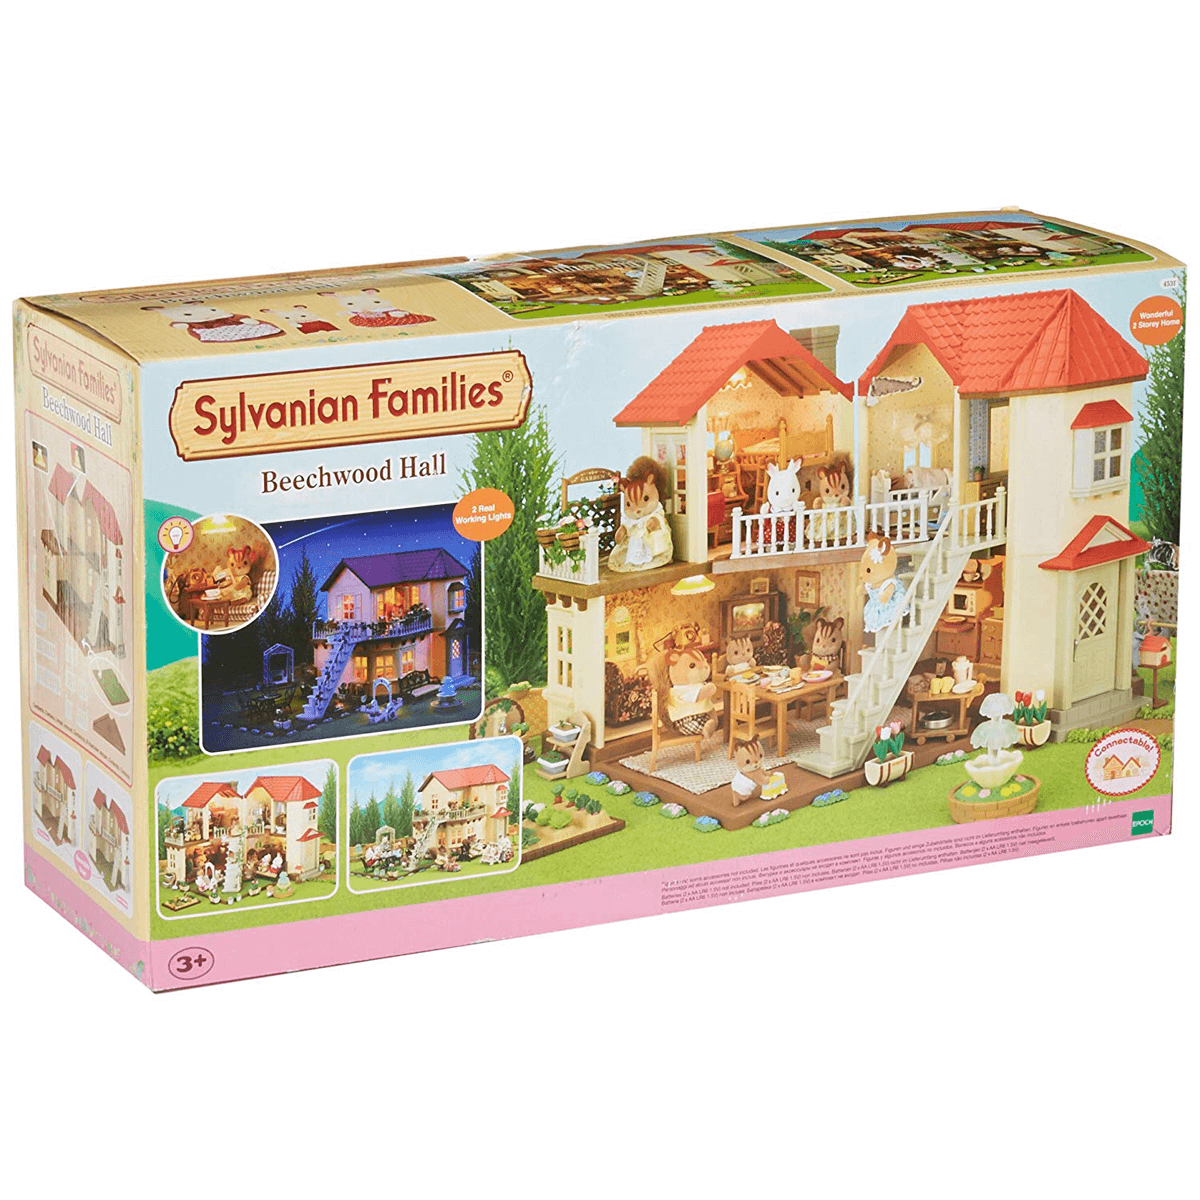 SYLVANIAN FAMILIES BEECHWOOD HALL DOLL HOUSE WITH WORKING LIGHTS 4531 